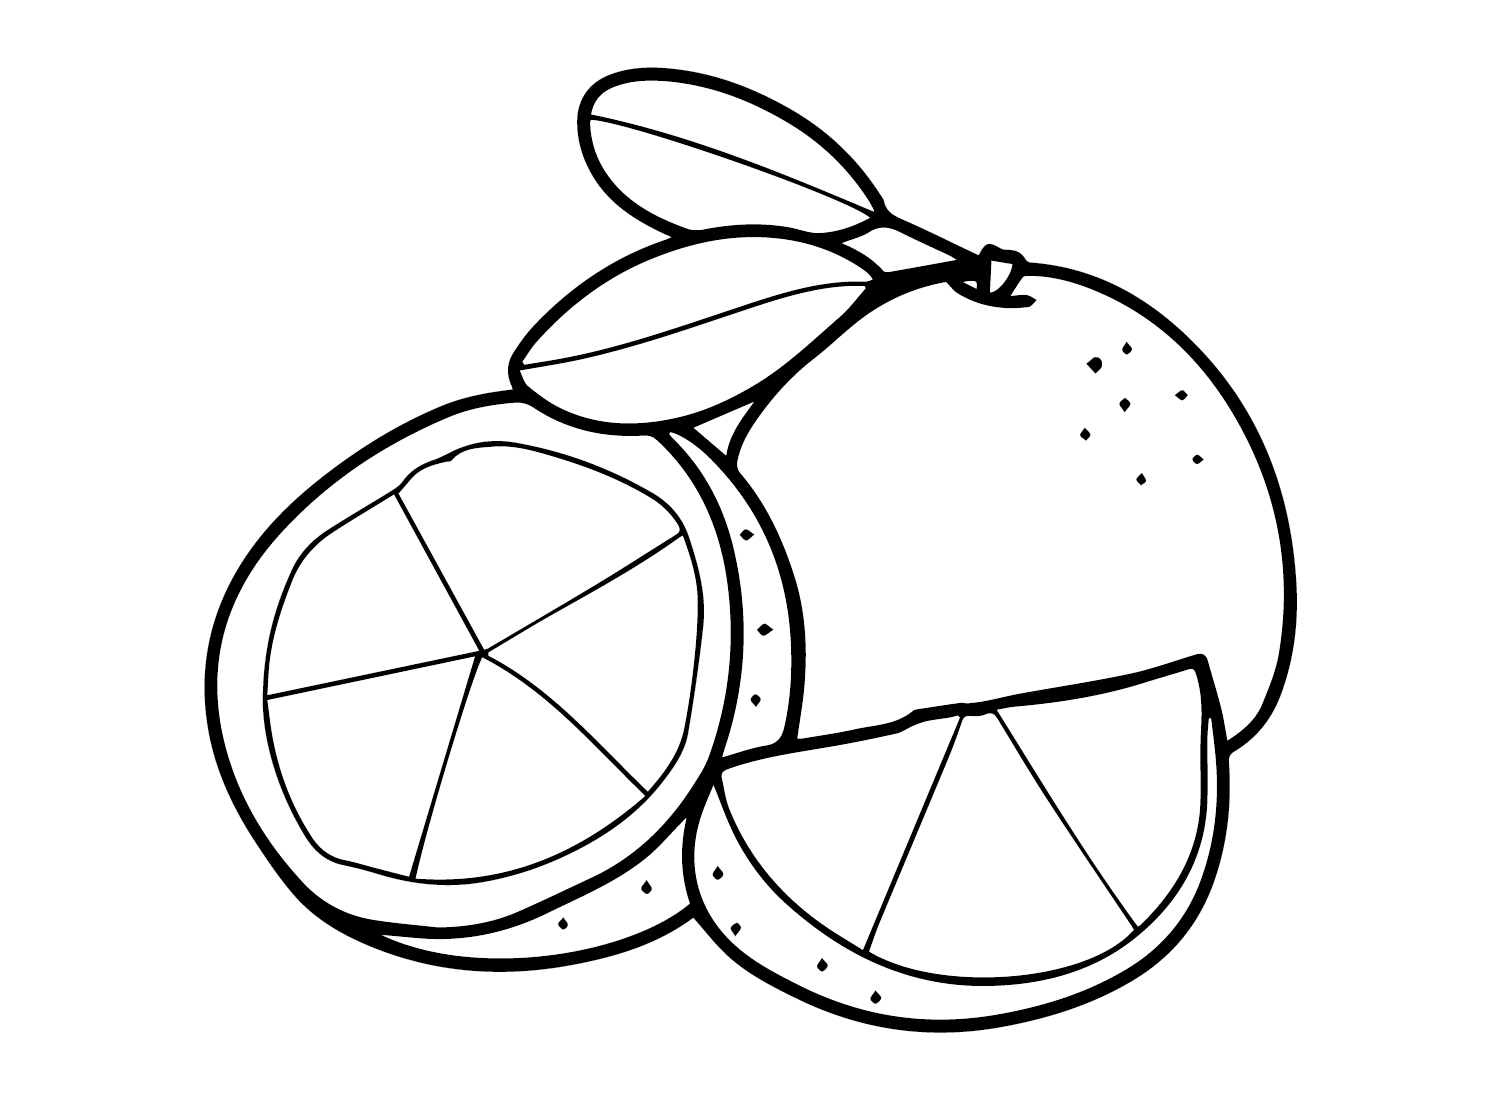 Pomelo Coloring Pages Printable for Free Download